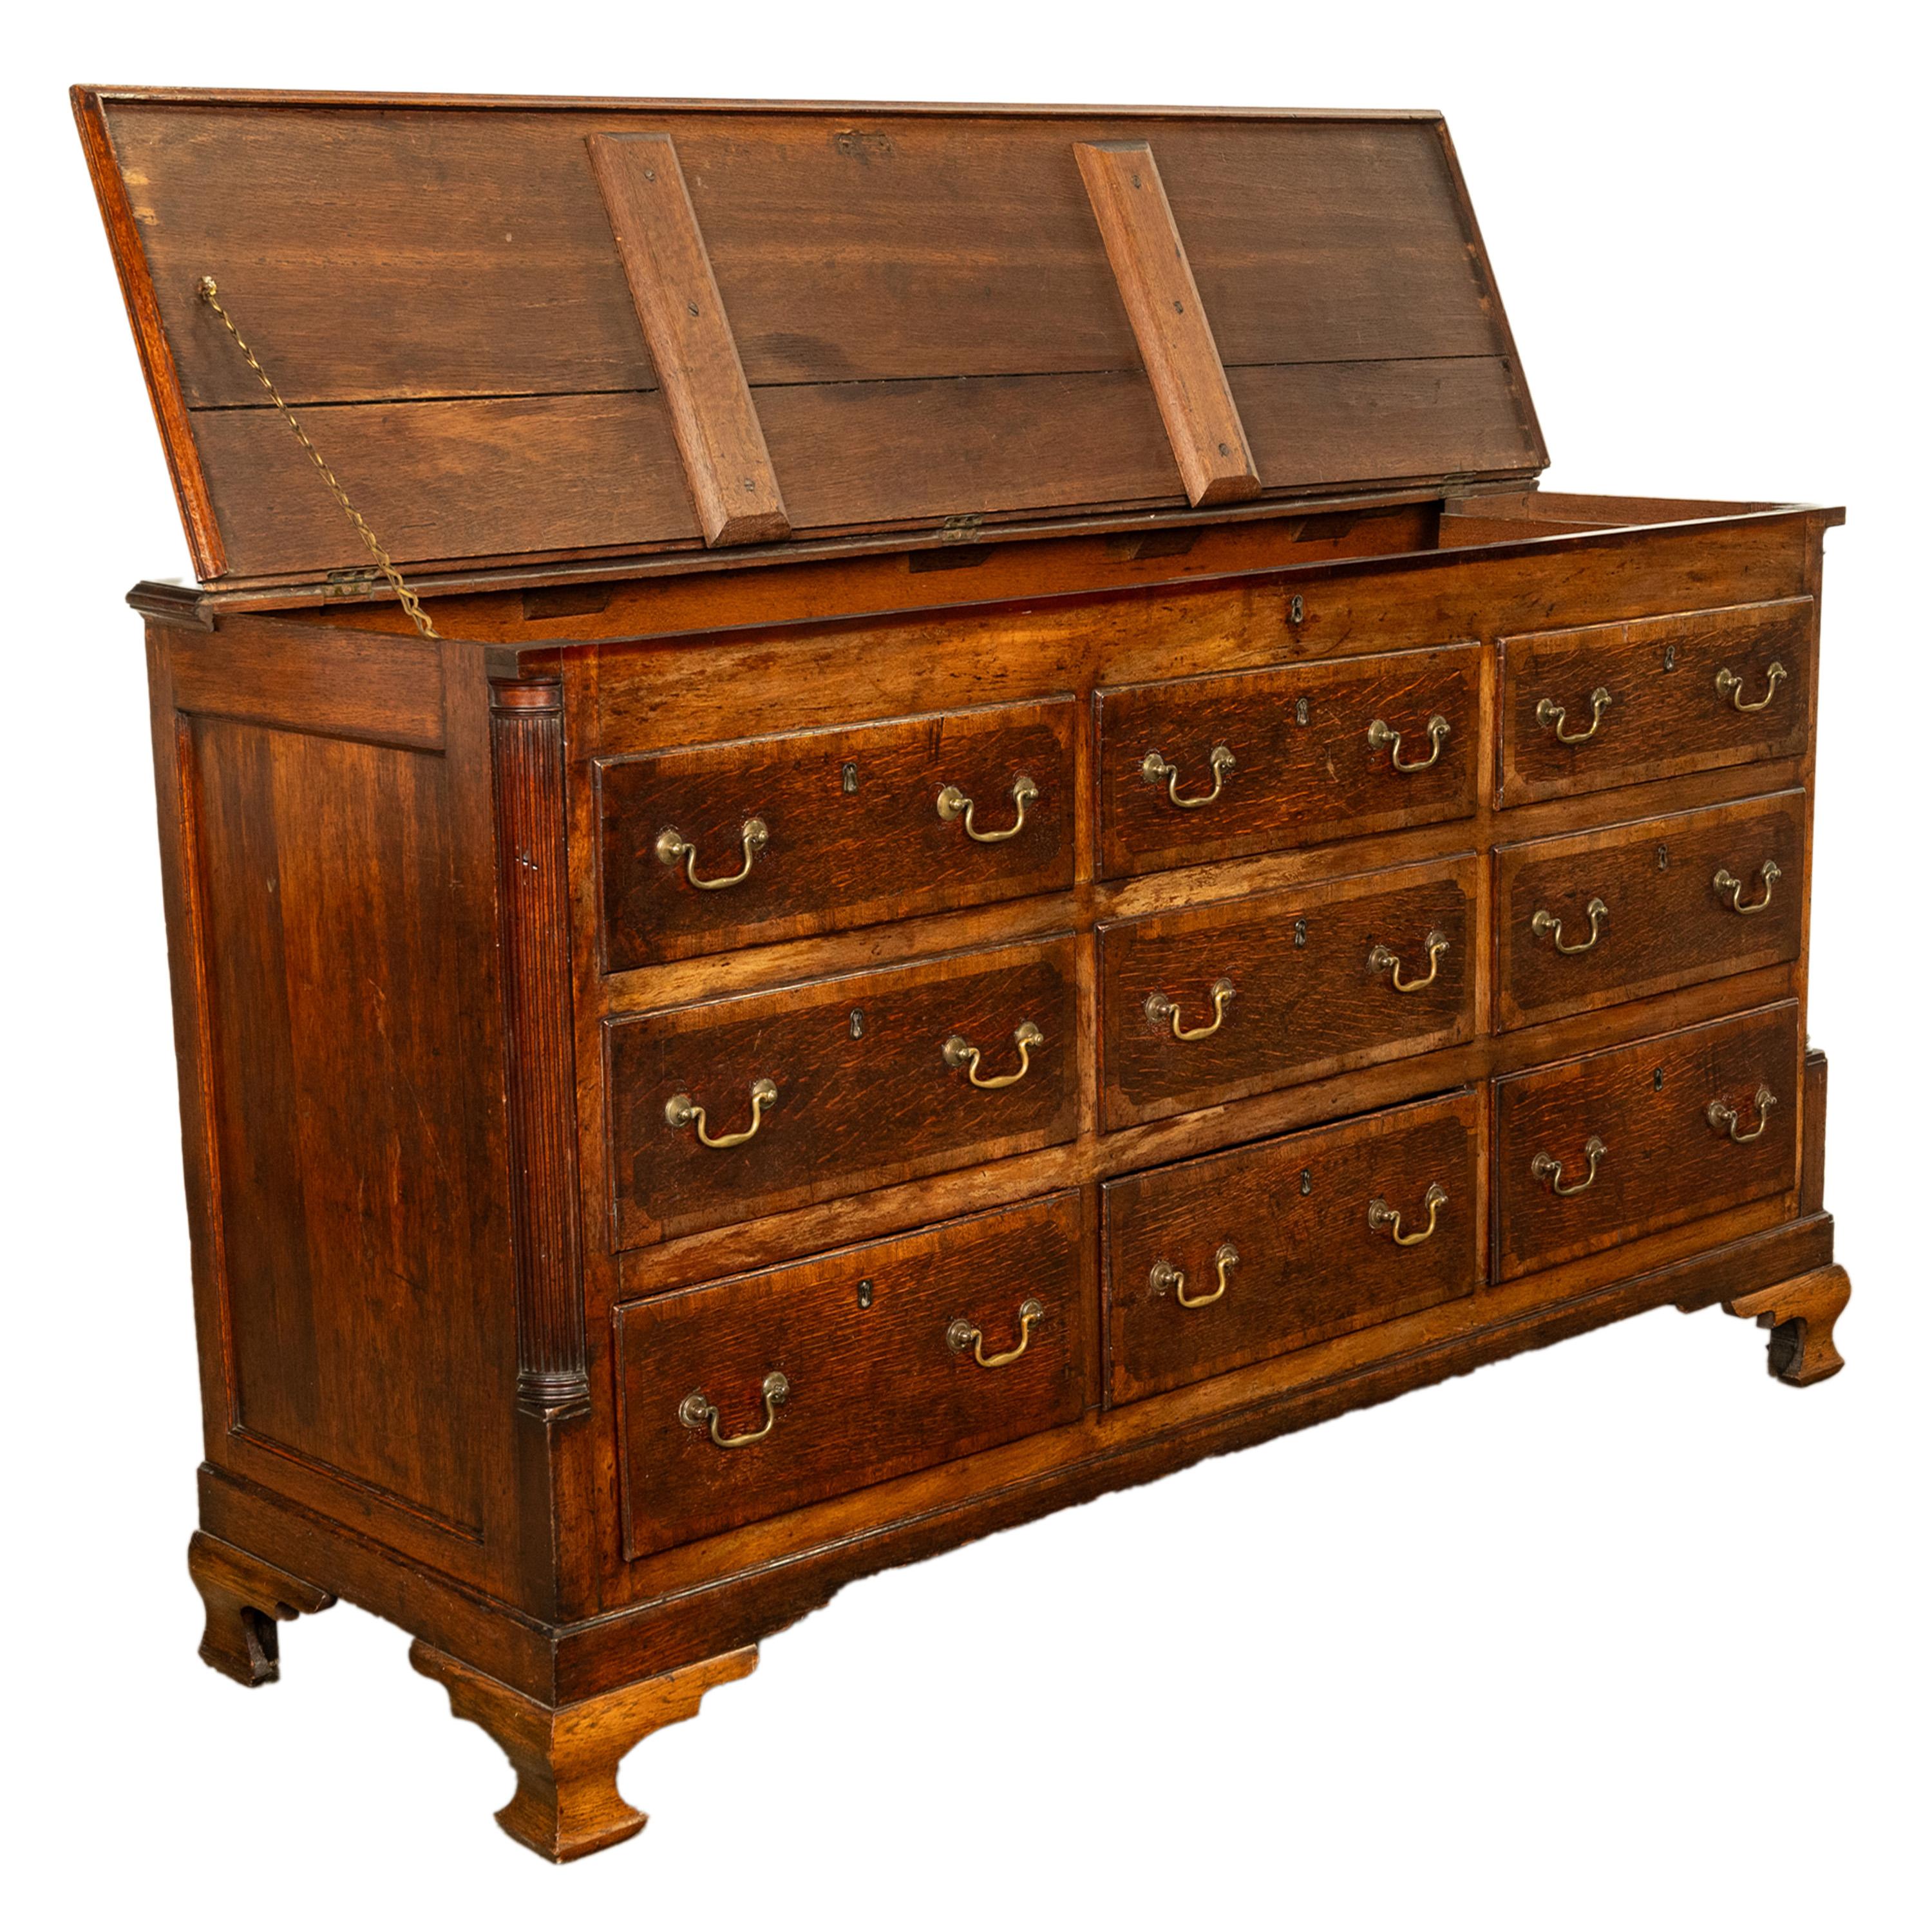 Antique 18th C Georgian Oak Mahogany Hinged Top Mule Chest Coffer Sideboard 1770 For Sale 3